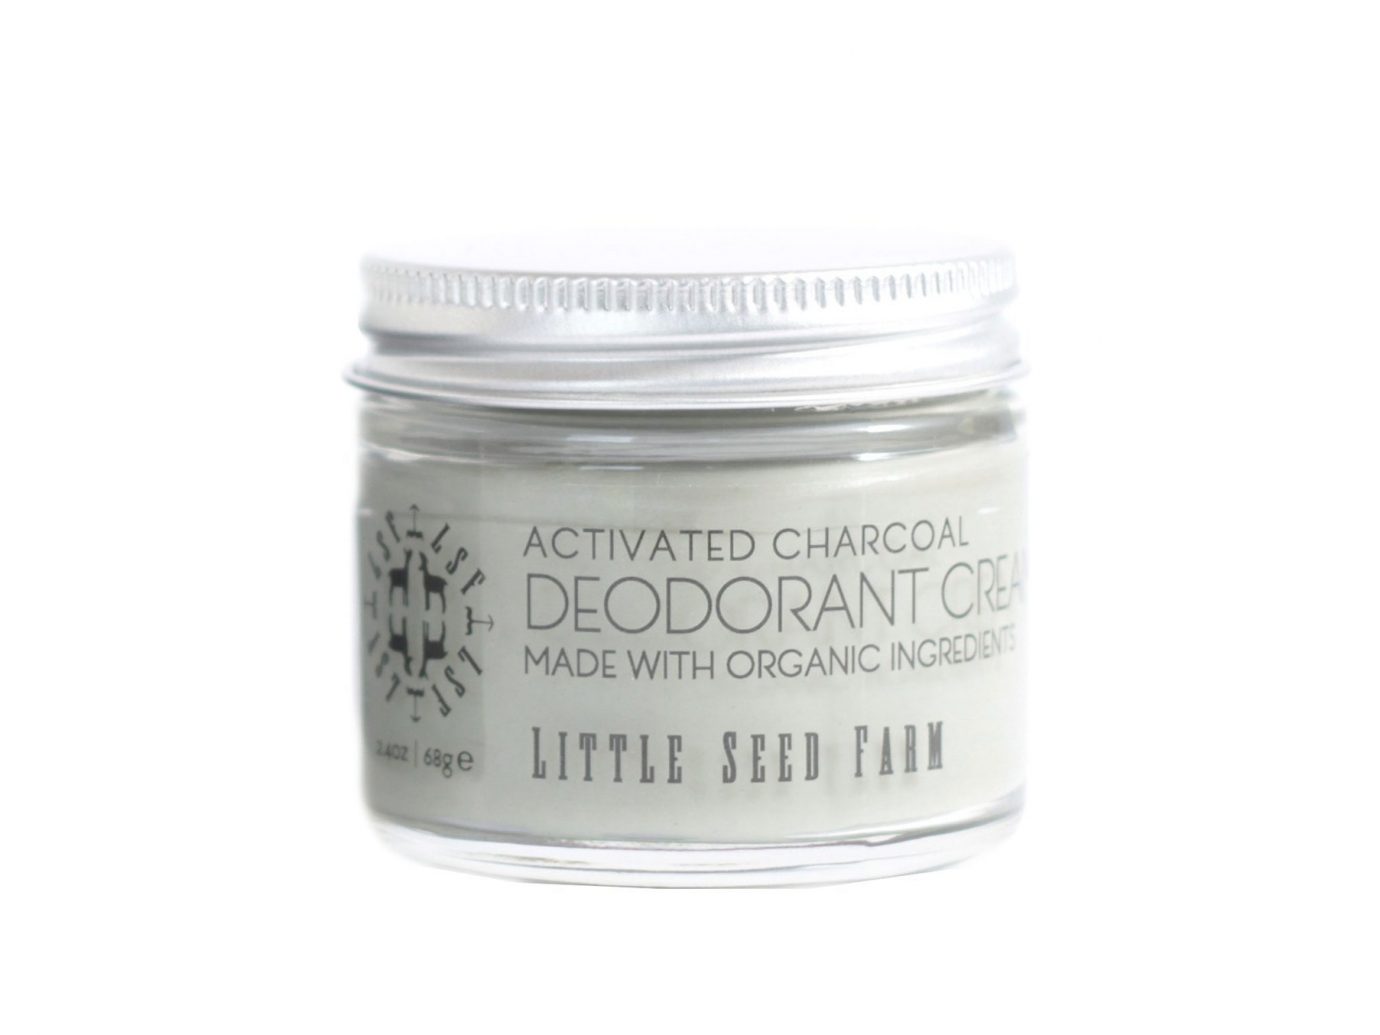 Little Seed Farm Natural Deodorant Cream: Activated Charcoal